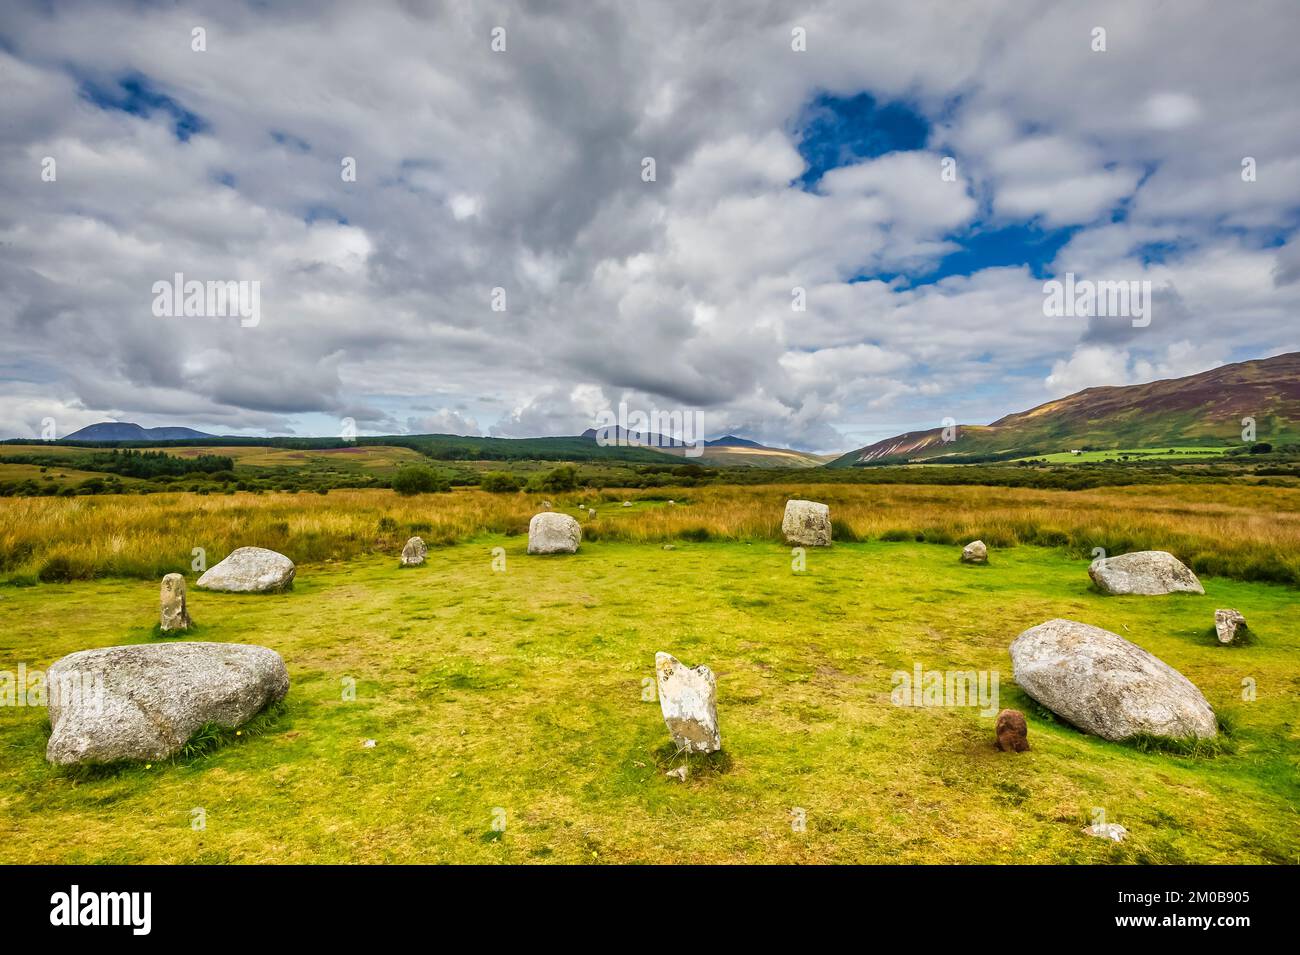 The image is of the Machrie stone circle thought to be around 5000 years old on the Island of Arran Stock Photo